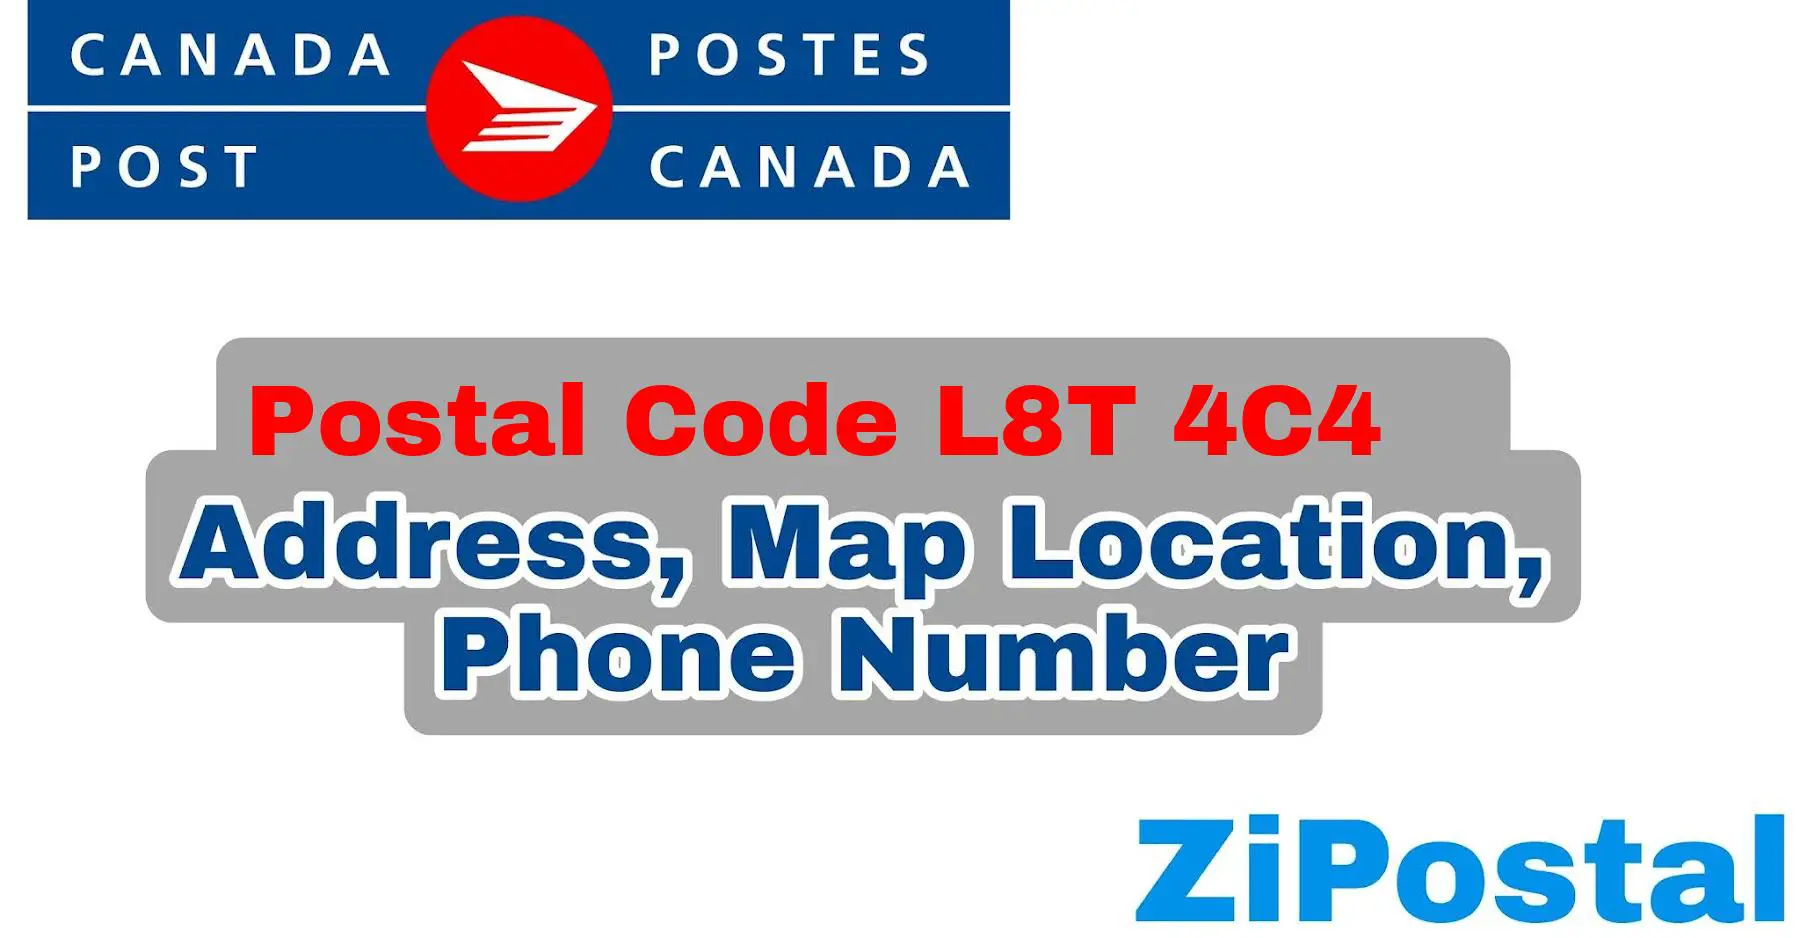 Postal Code L8T 4C4 Address Map Location and Phone Number